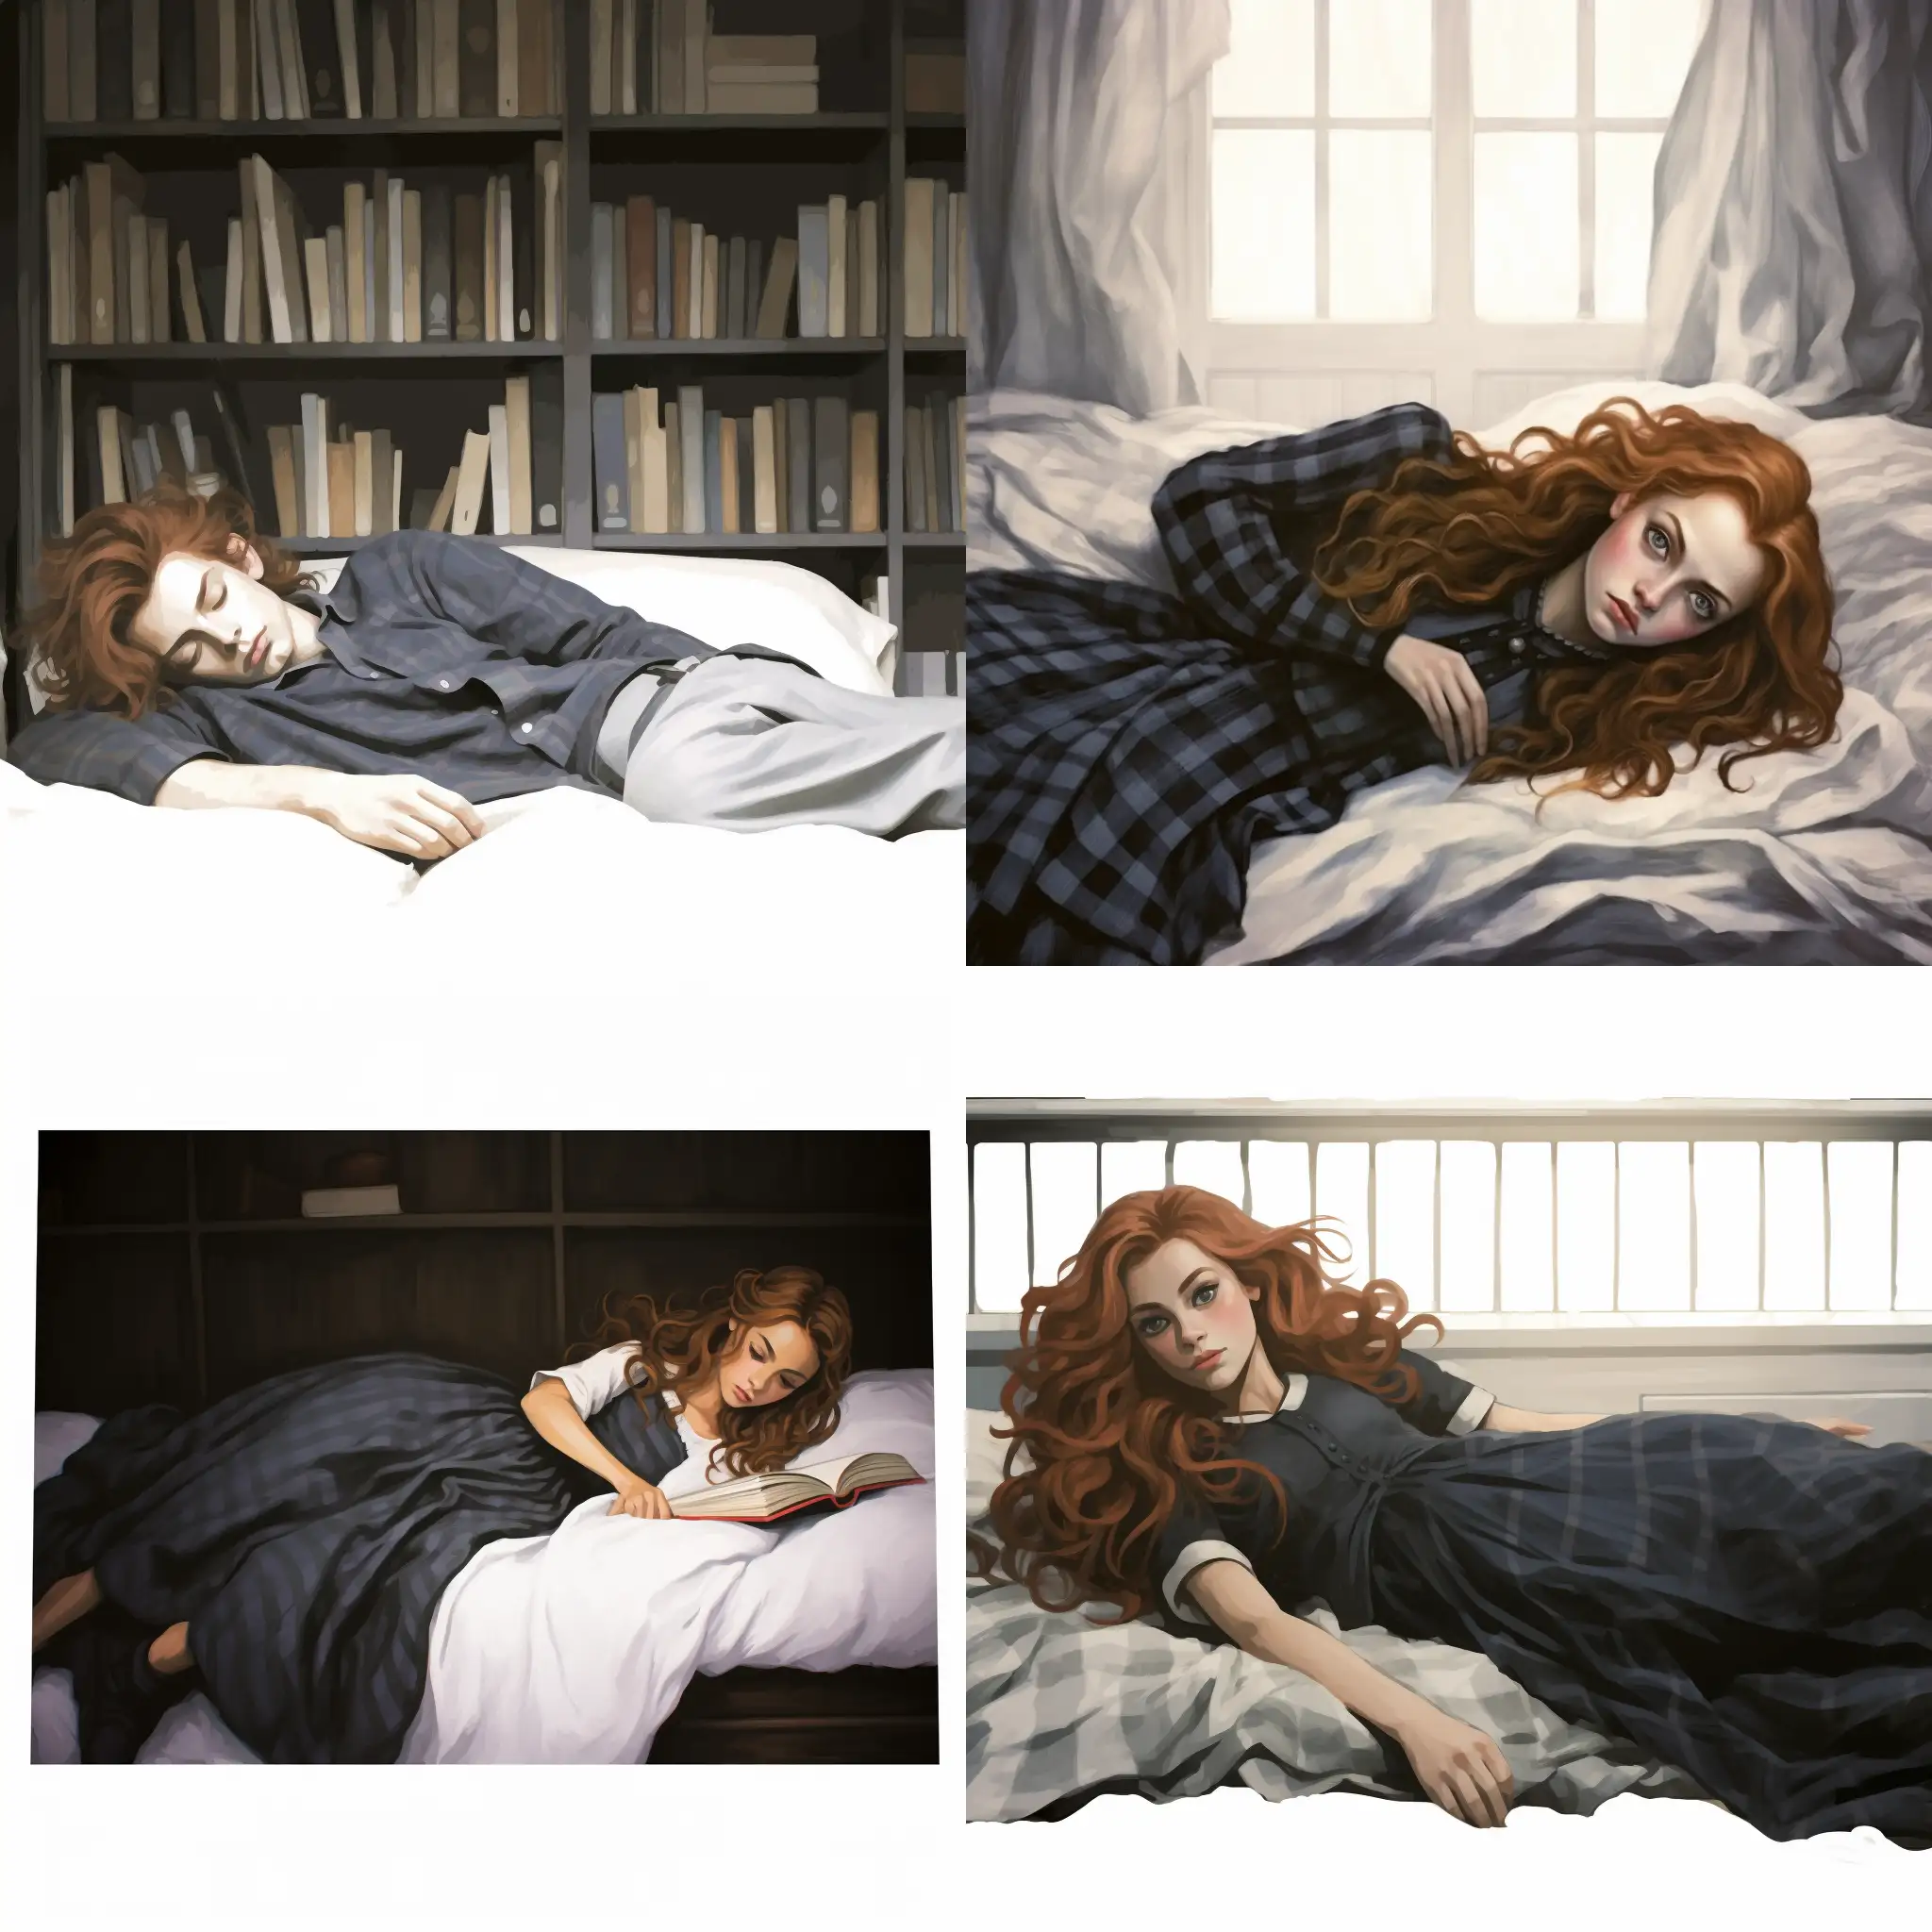 Hermione-Granger-Relaxing-on-a-Cozy-Bed-in-Hogwarts-Dormitory-with-Black-Stockings